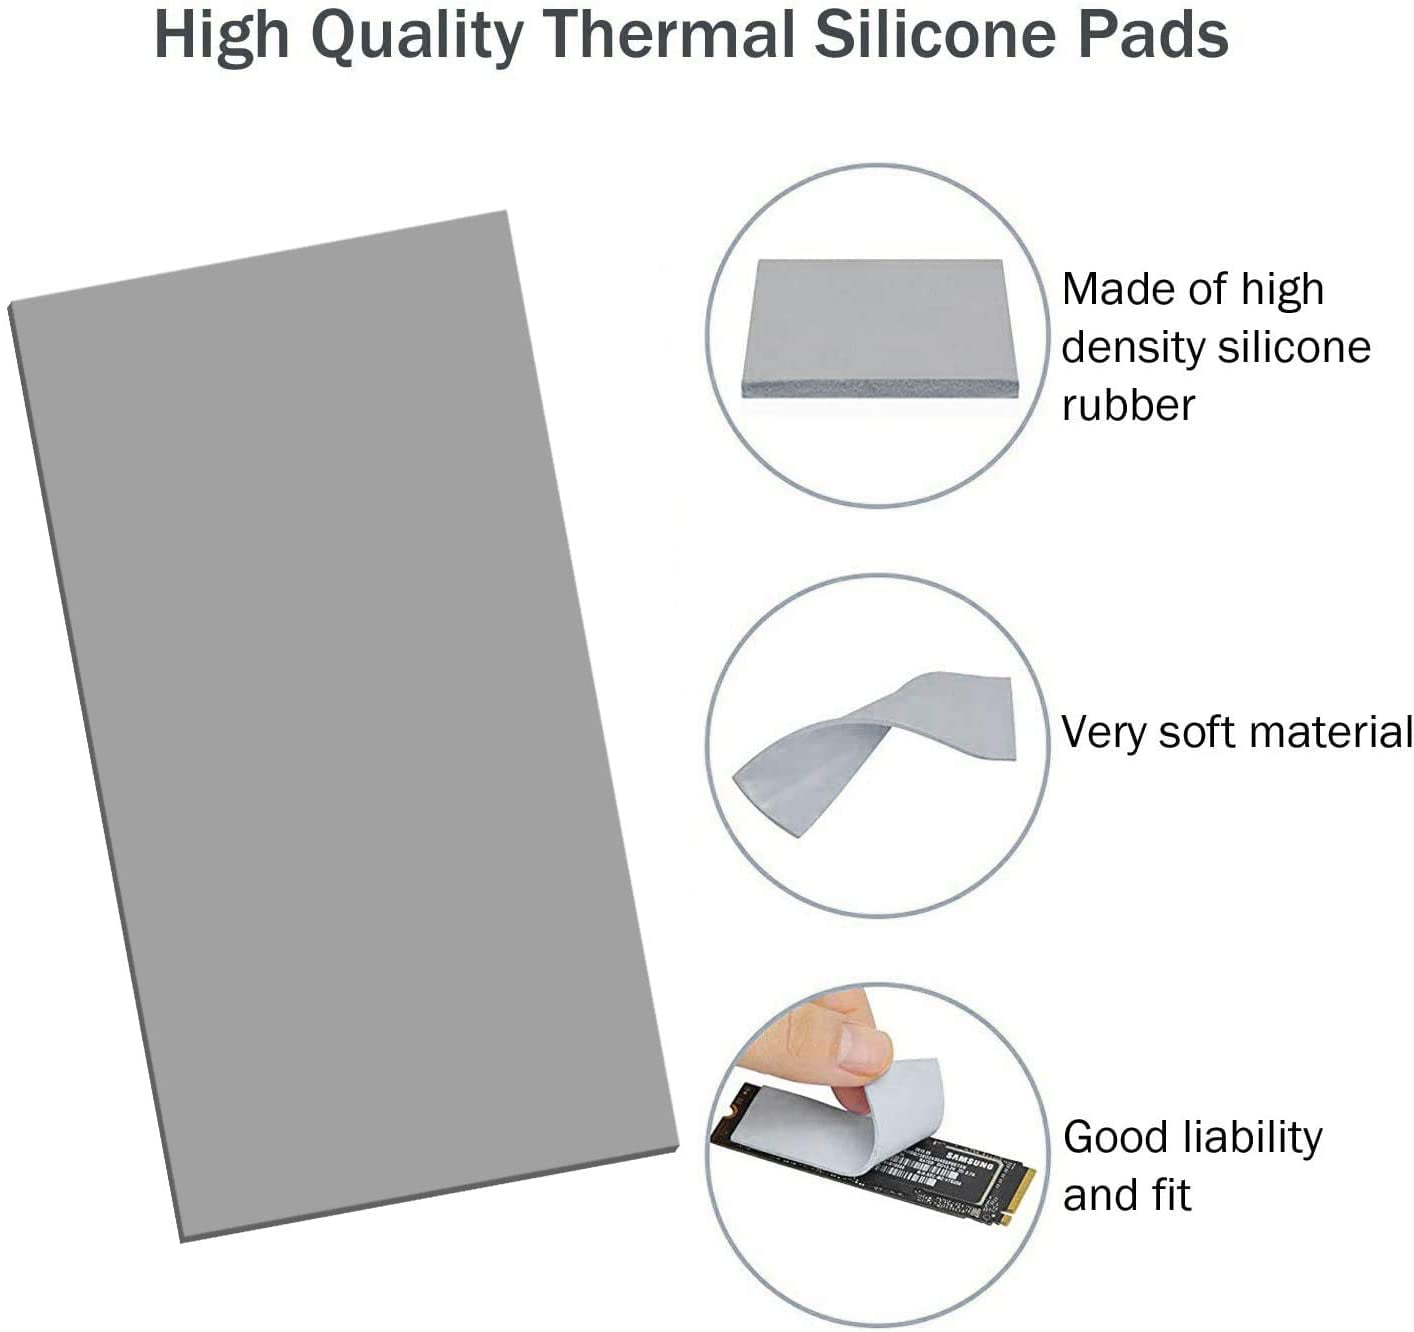 Non Conductive Heat Resistance High Temperature Resistance for Laptop Heatsink/GPU/CPU/LED Cooler Gray Thermalright Thermal Pad Silicone Thermal Pads 12.8 W/mK 1.0mm 